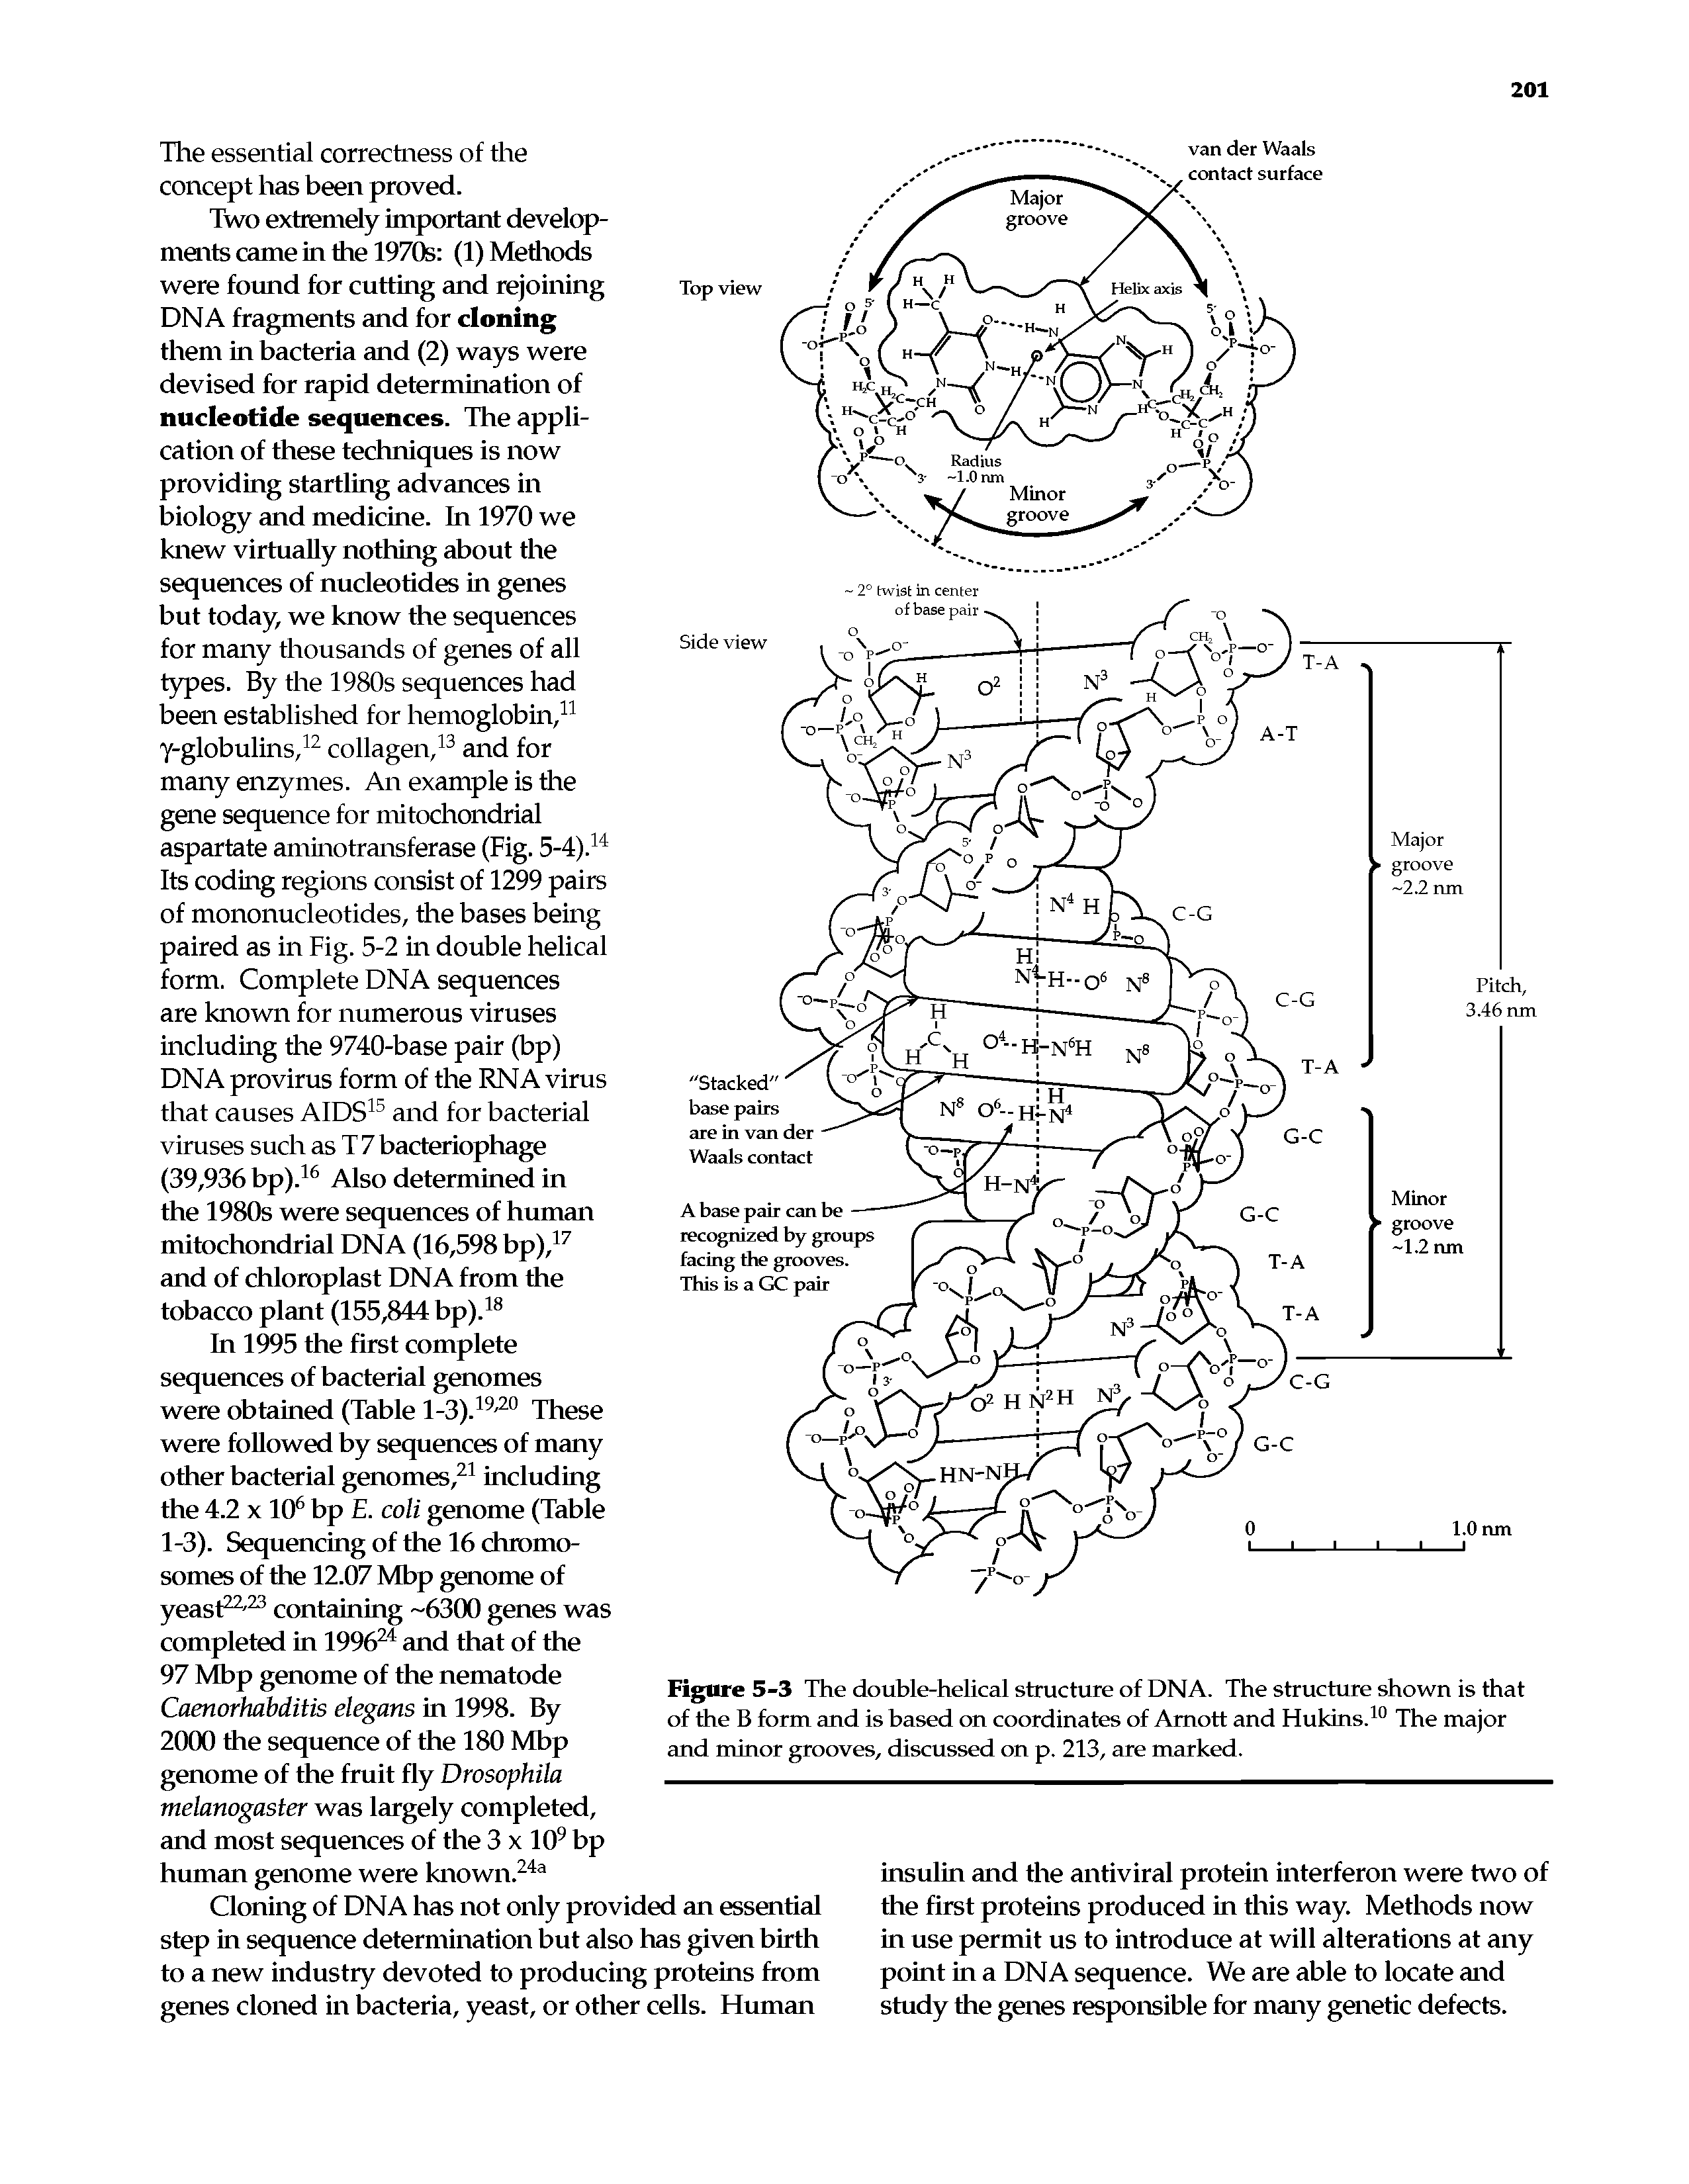 Figure 5-3 The double-helical structure of DNA. The structure shown is that of the B form and is based on coordinates of Amott and Hukins.10 The major and minor grooves, discussed on p. 213, are marked.